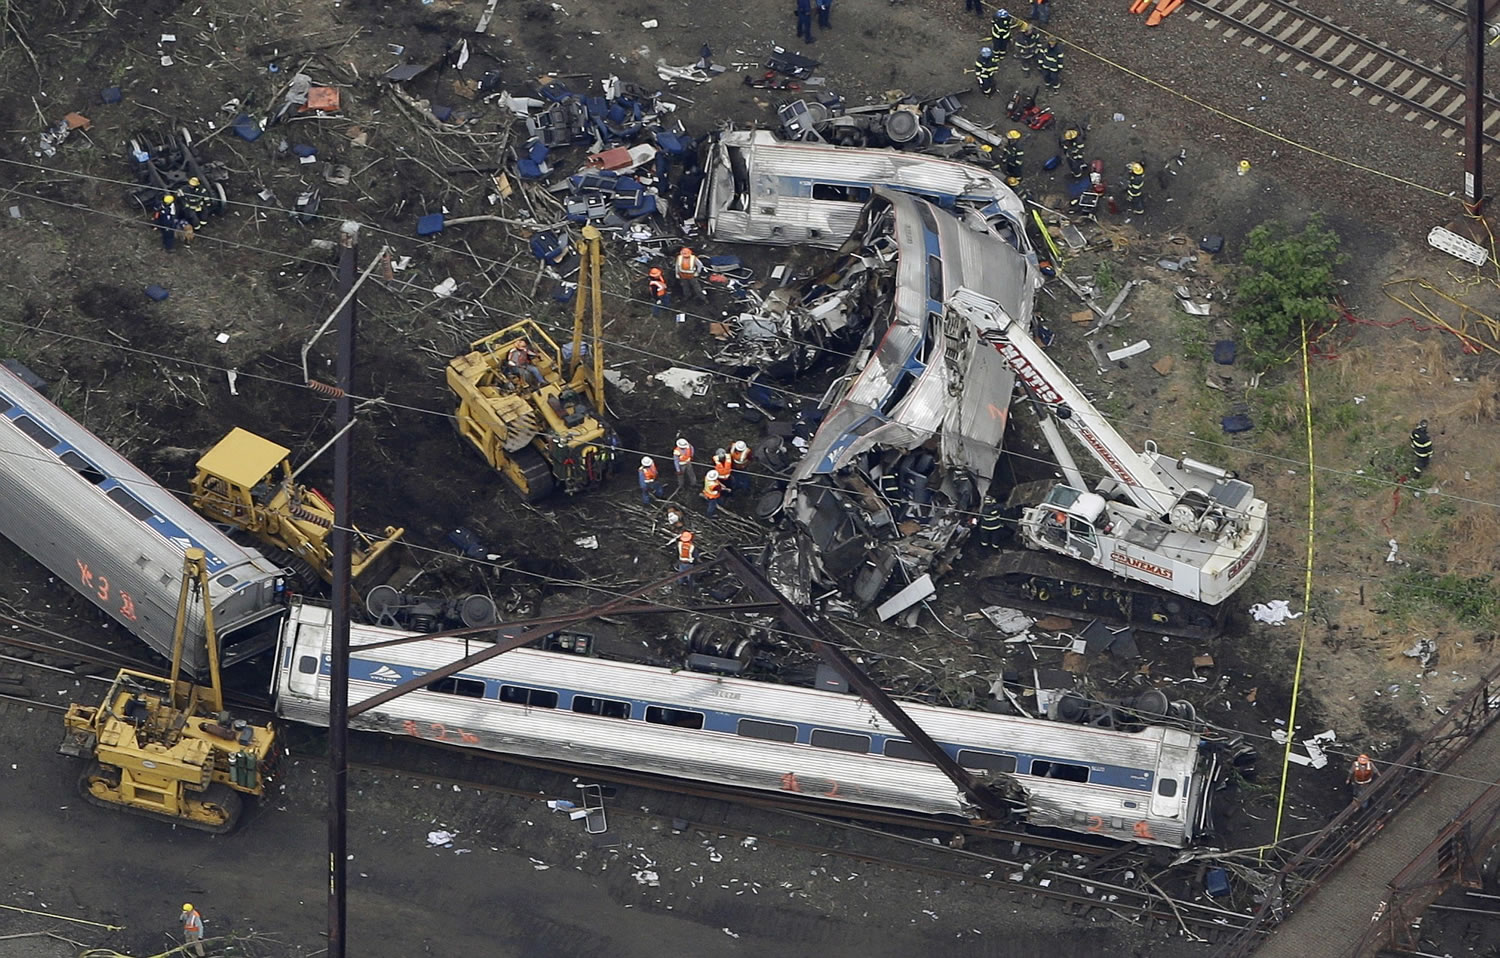 FILE - In this May 13, 2015, file photo, emergency personnel work at the scene of a deadly train wreck in Philadelphia. Federal safety regulators and Amtrak officials face questions at a congressional hearing Tuesday, June 2, 2015, on why technology to slow trains that are going too fast wasn?t in place before last month?s deadly derailment.